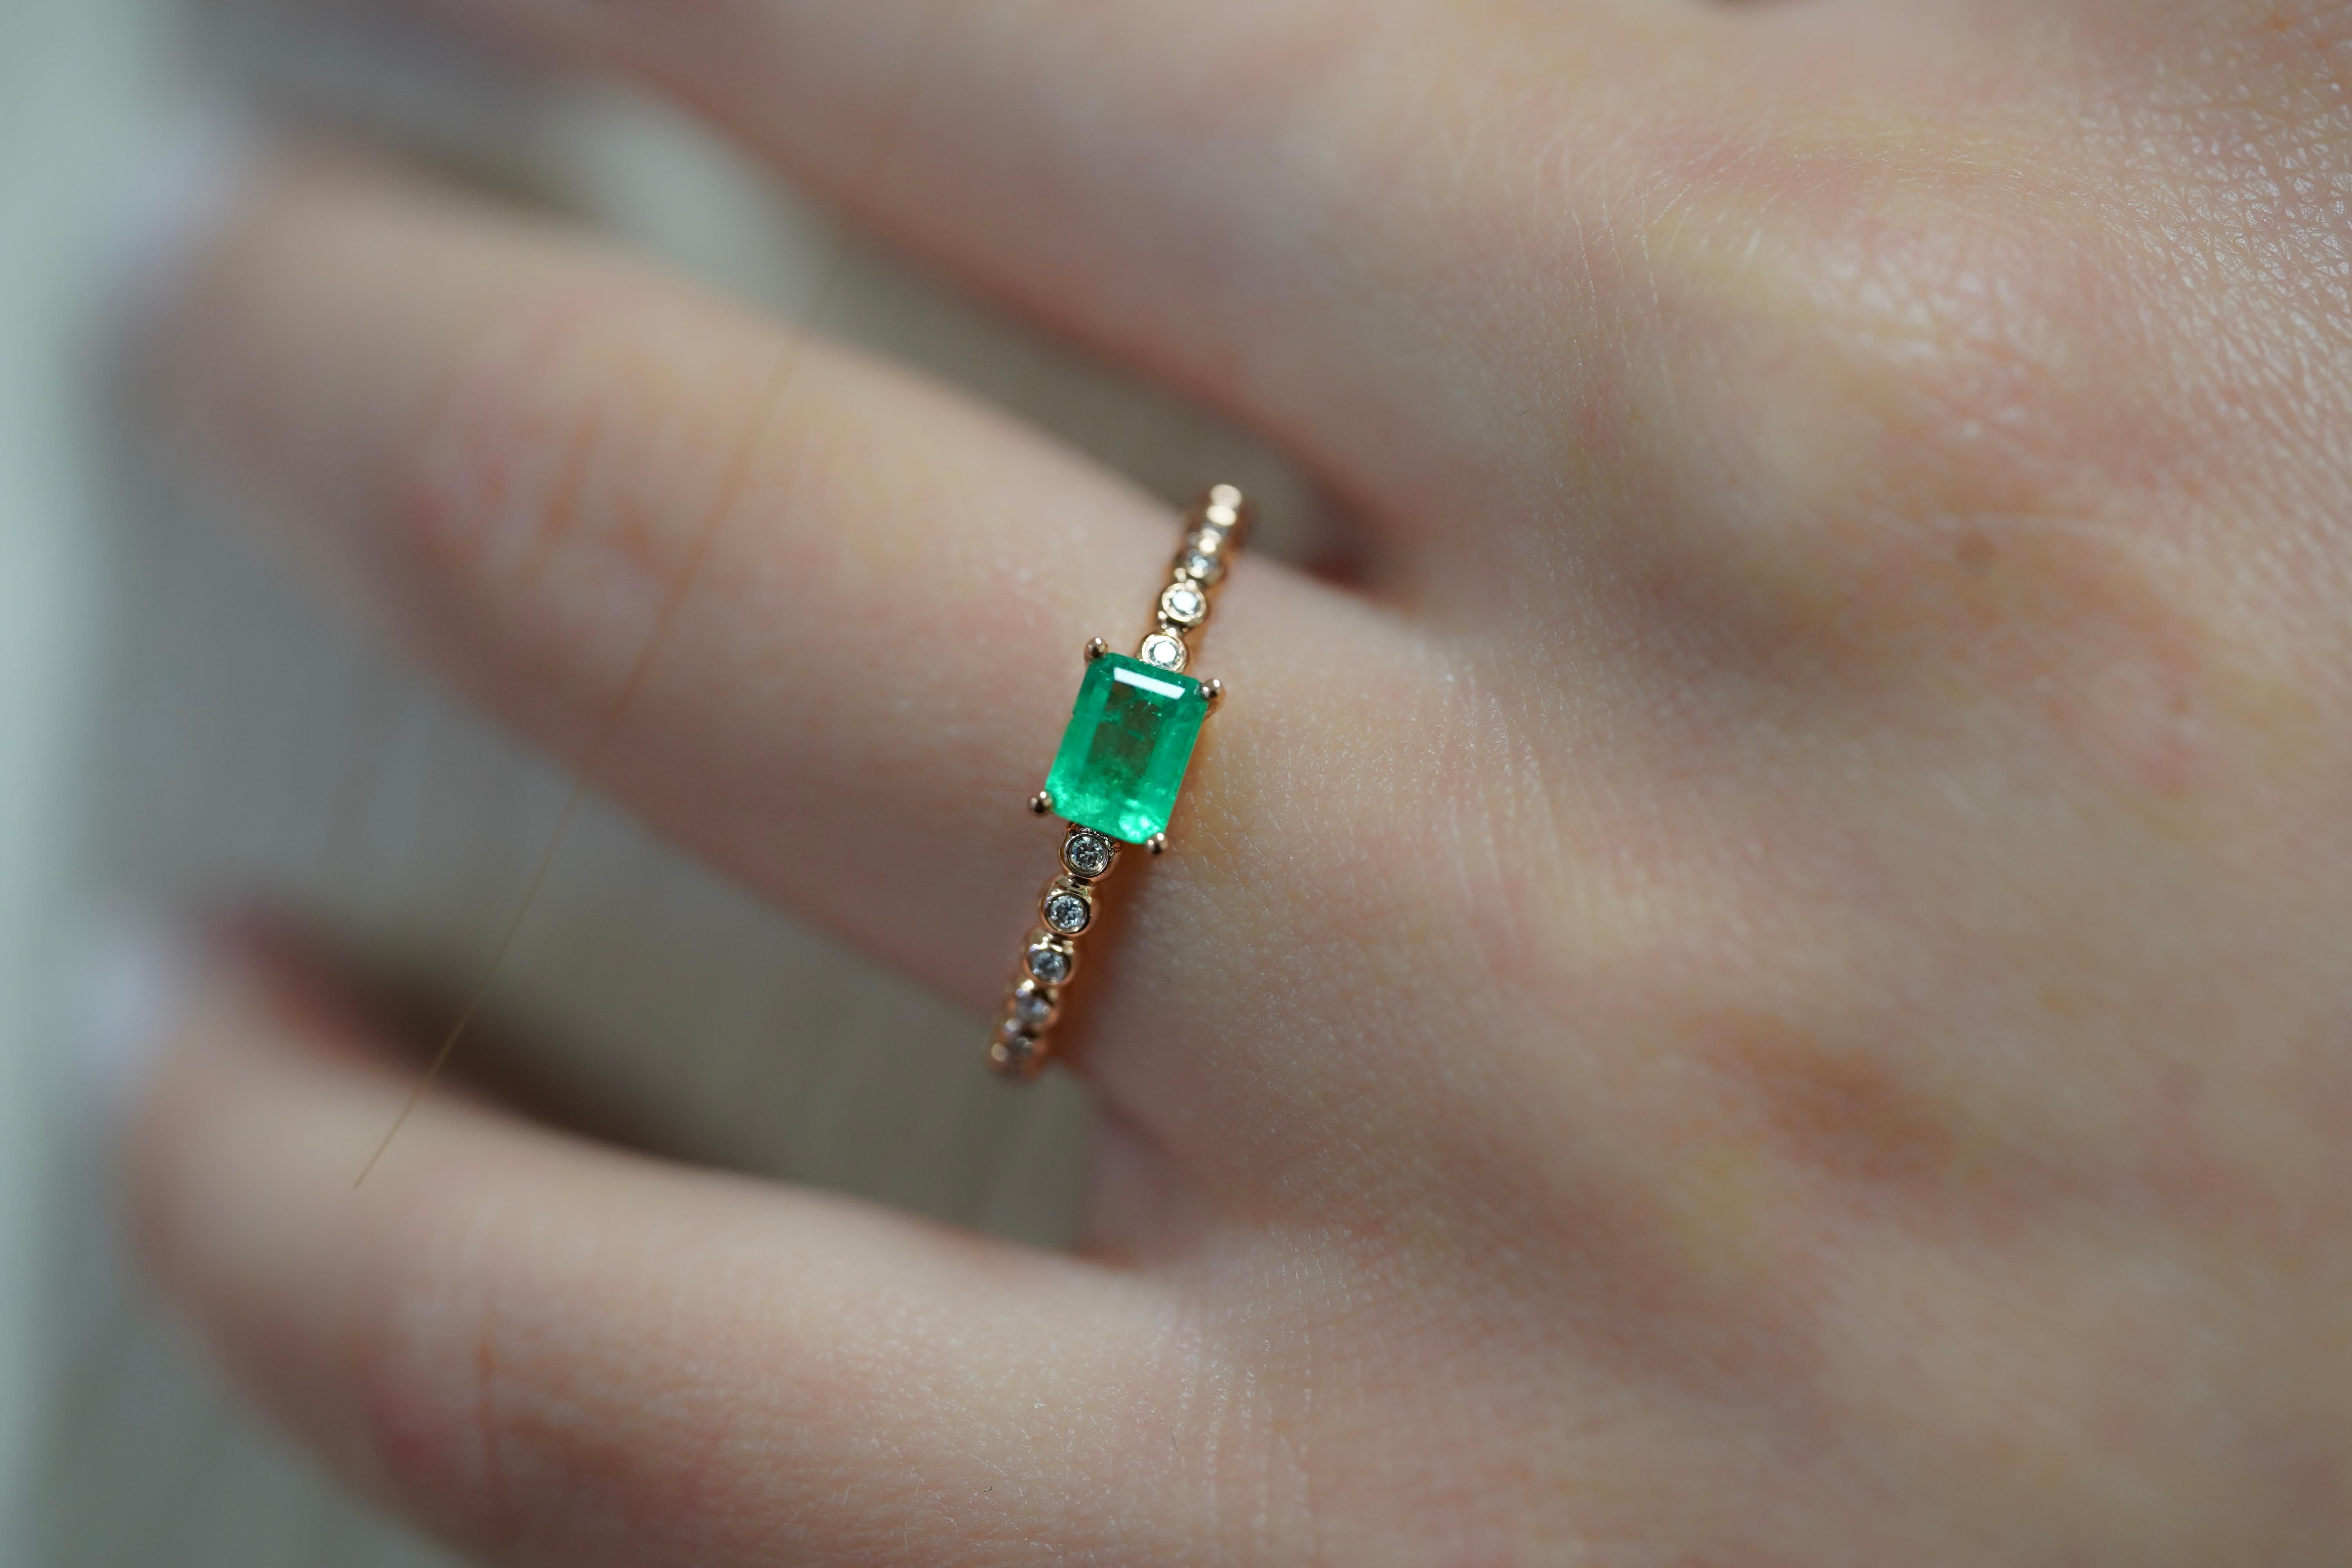 18K rose gold Emerald and Diamond ring. Set with natural gemstones and glistening 18k solid gold. Dainty 2mm thin width and east west setting makes it ideal as a stacked band or wearing alone. The center stone bears a richly saturated Colombia Green